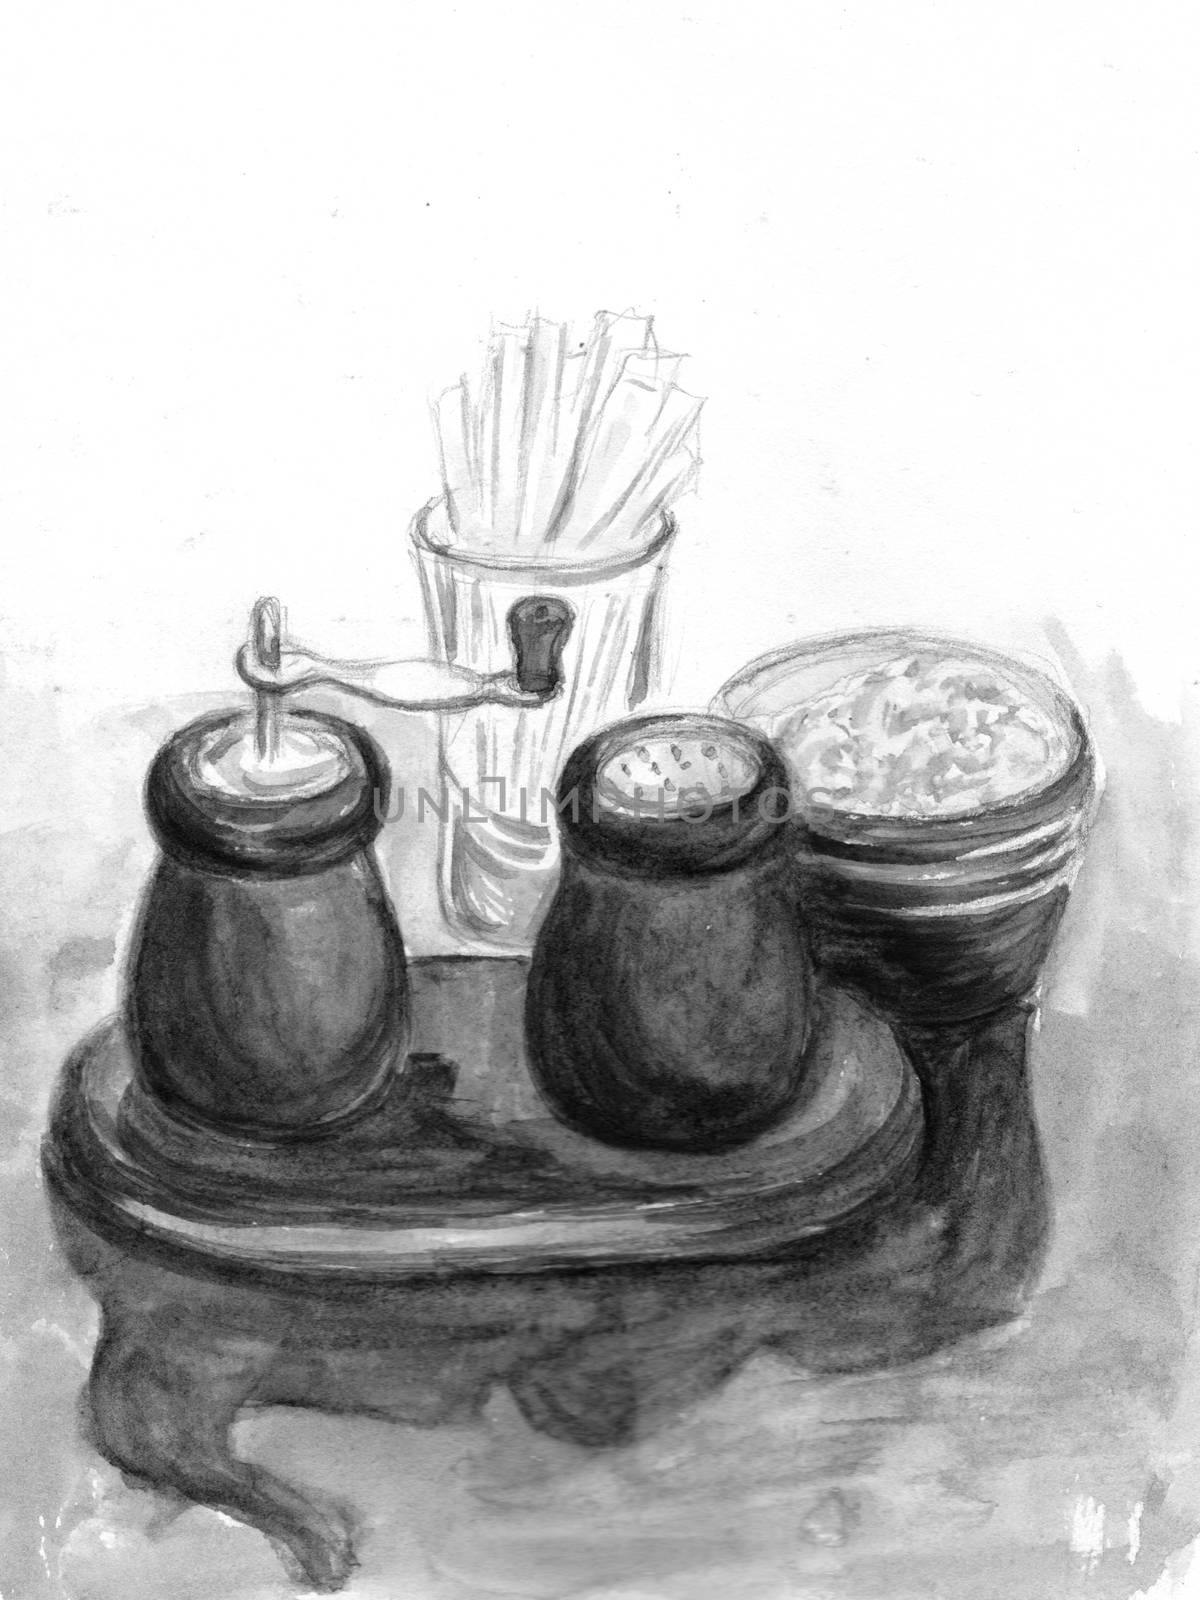 Salt and pepper shakers on table in cafe. Watercolor illustration. Hand-drawn sketch. Gray, black and white monochrome colors by sshisshka